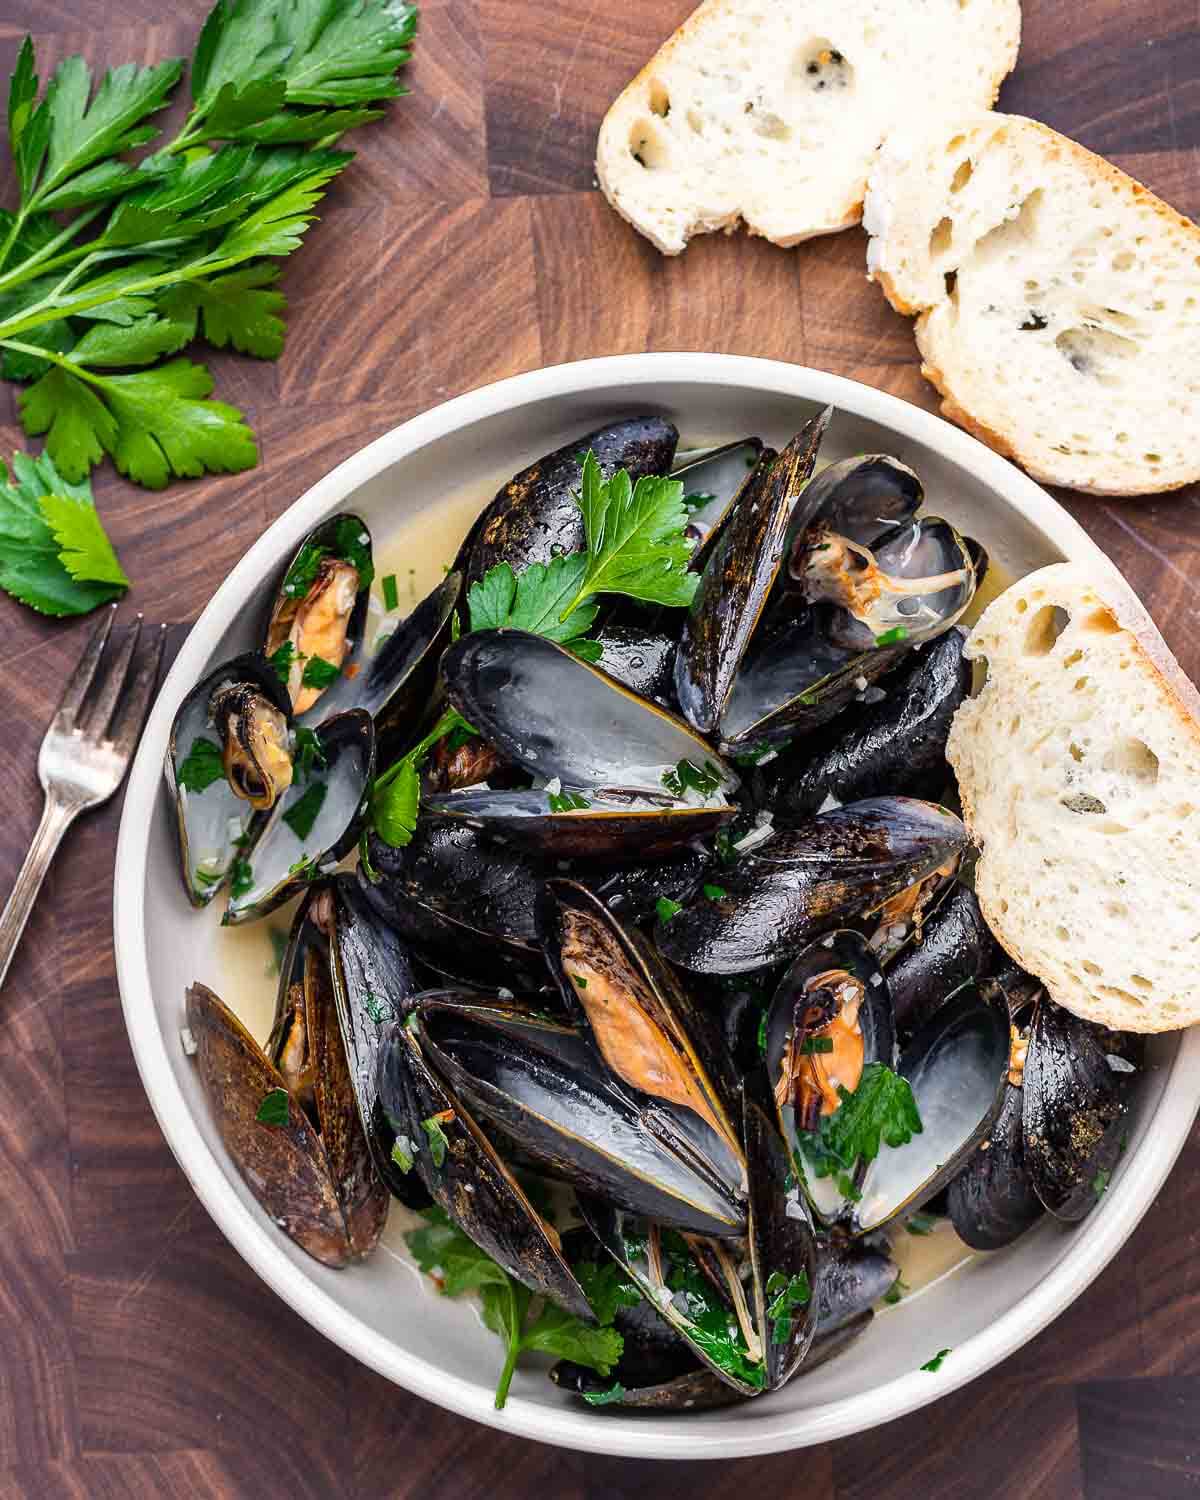 Overhead shot of steamed white wine mussels with slices of bread and parsley.